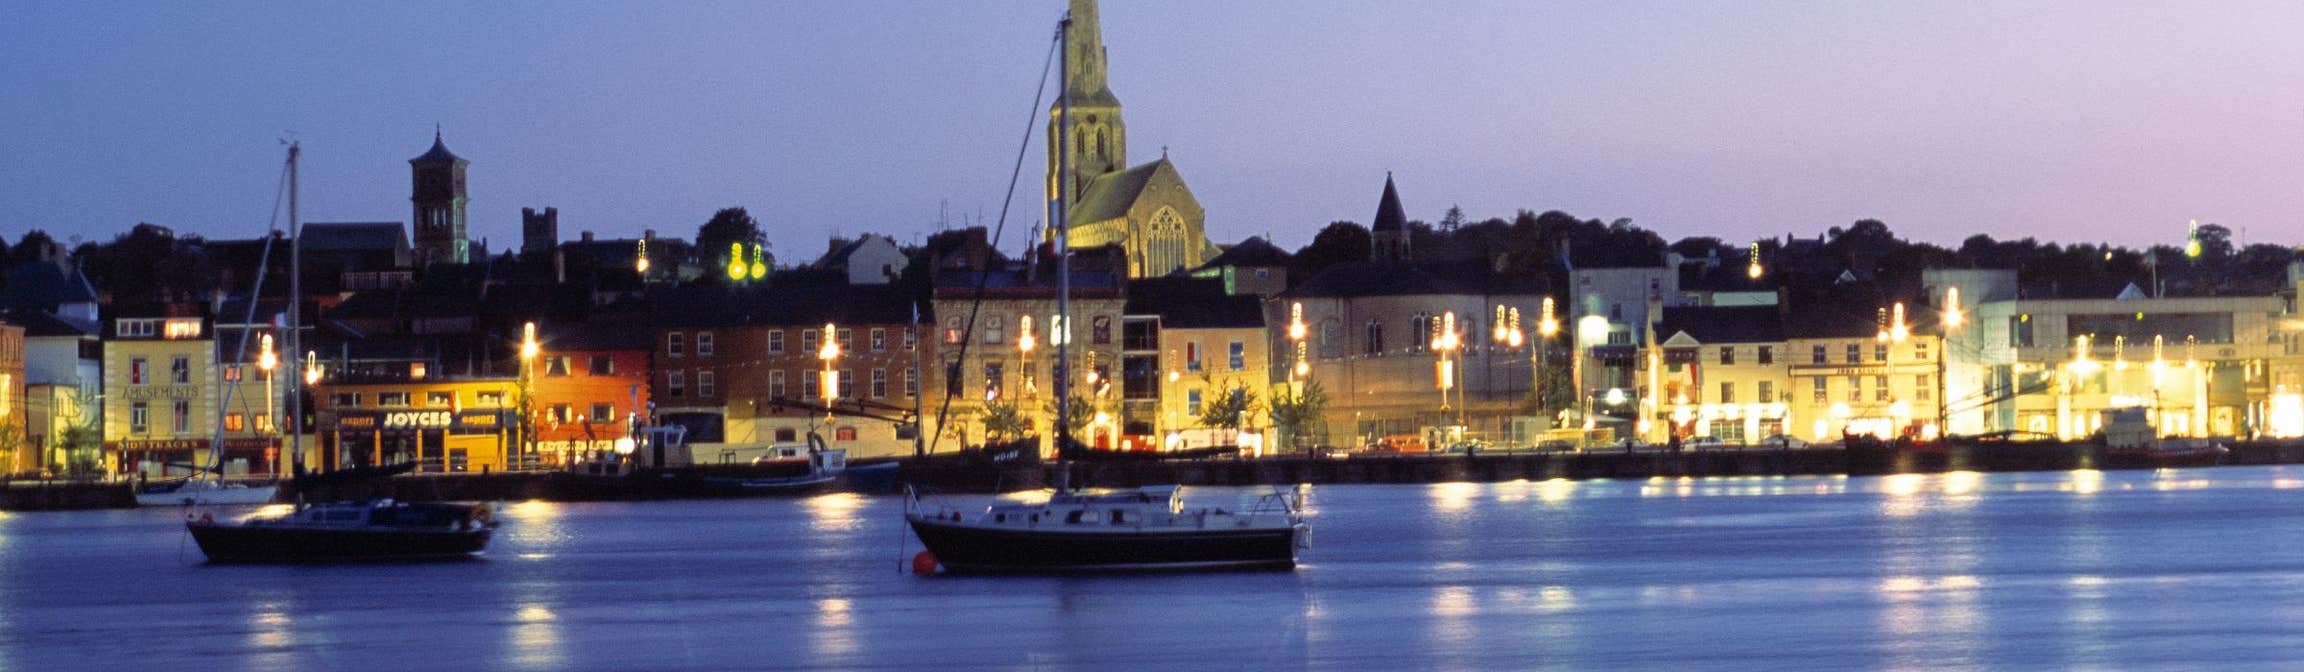 Boats in front of Wexford Town at night in Wexford